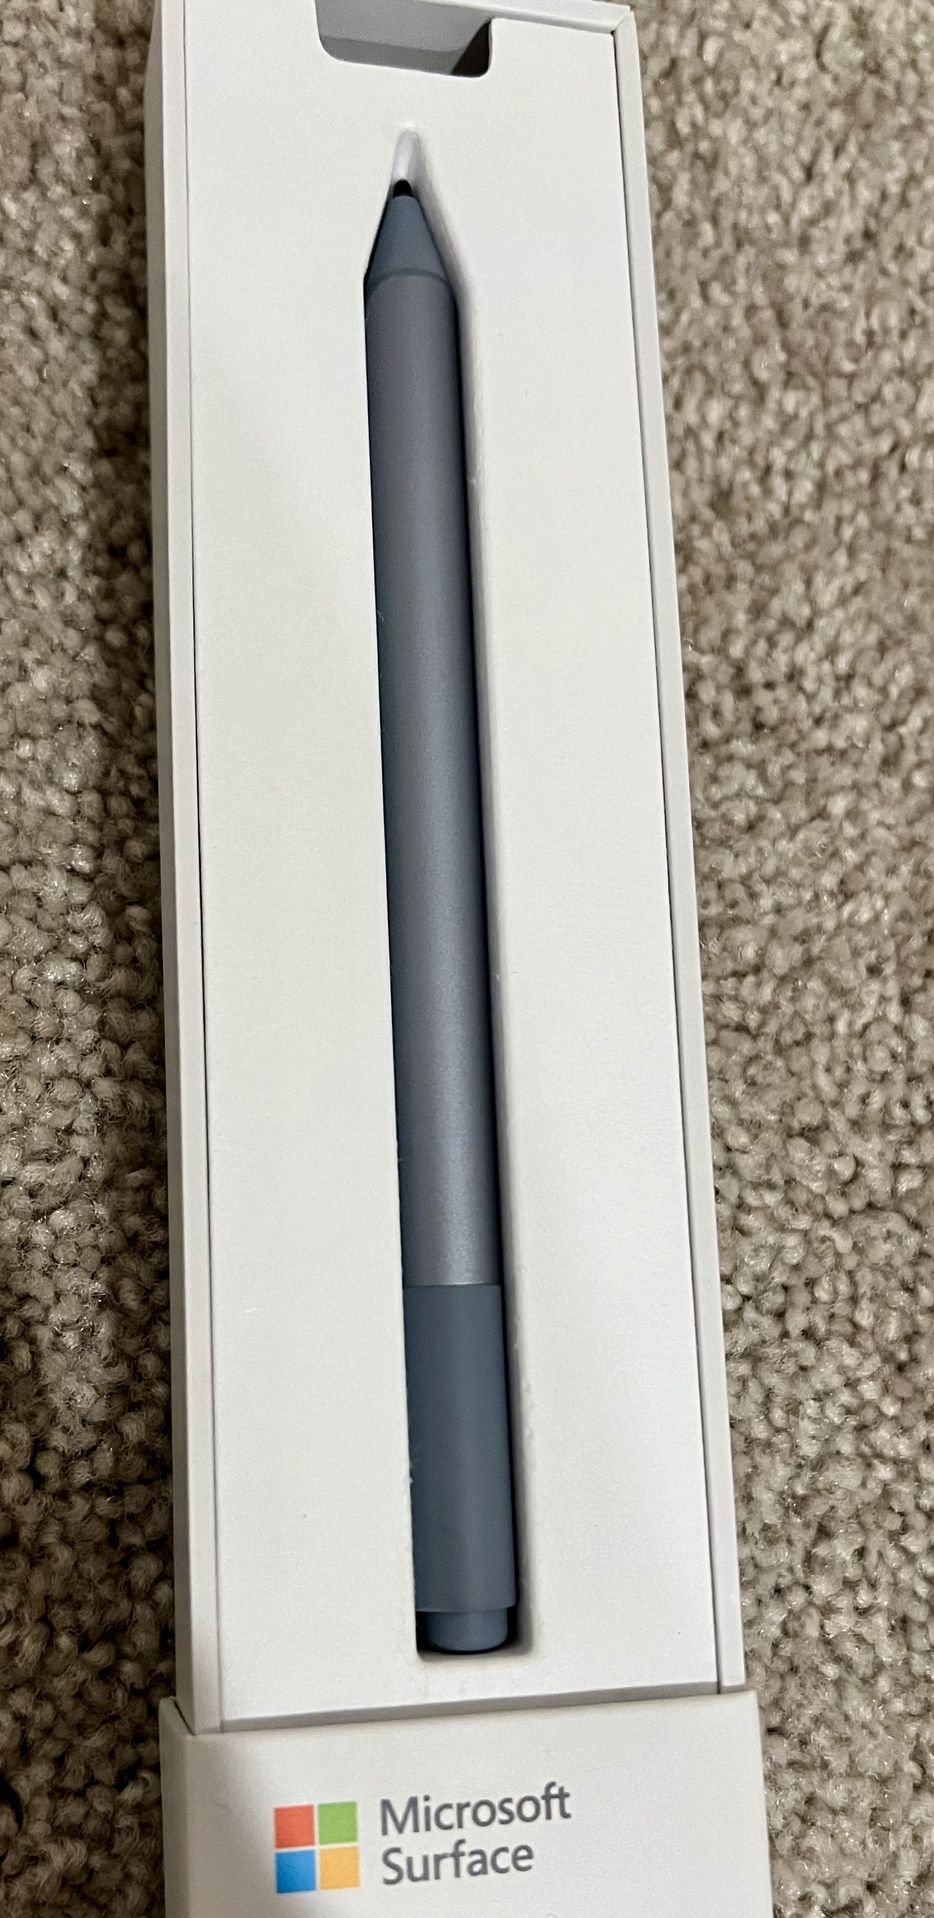 Microsoft EYU00049 Surface Pen - Ice Blue - Open Box, Excellent Cond Model #1776